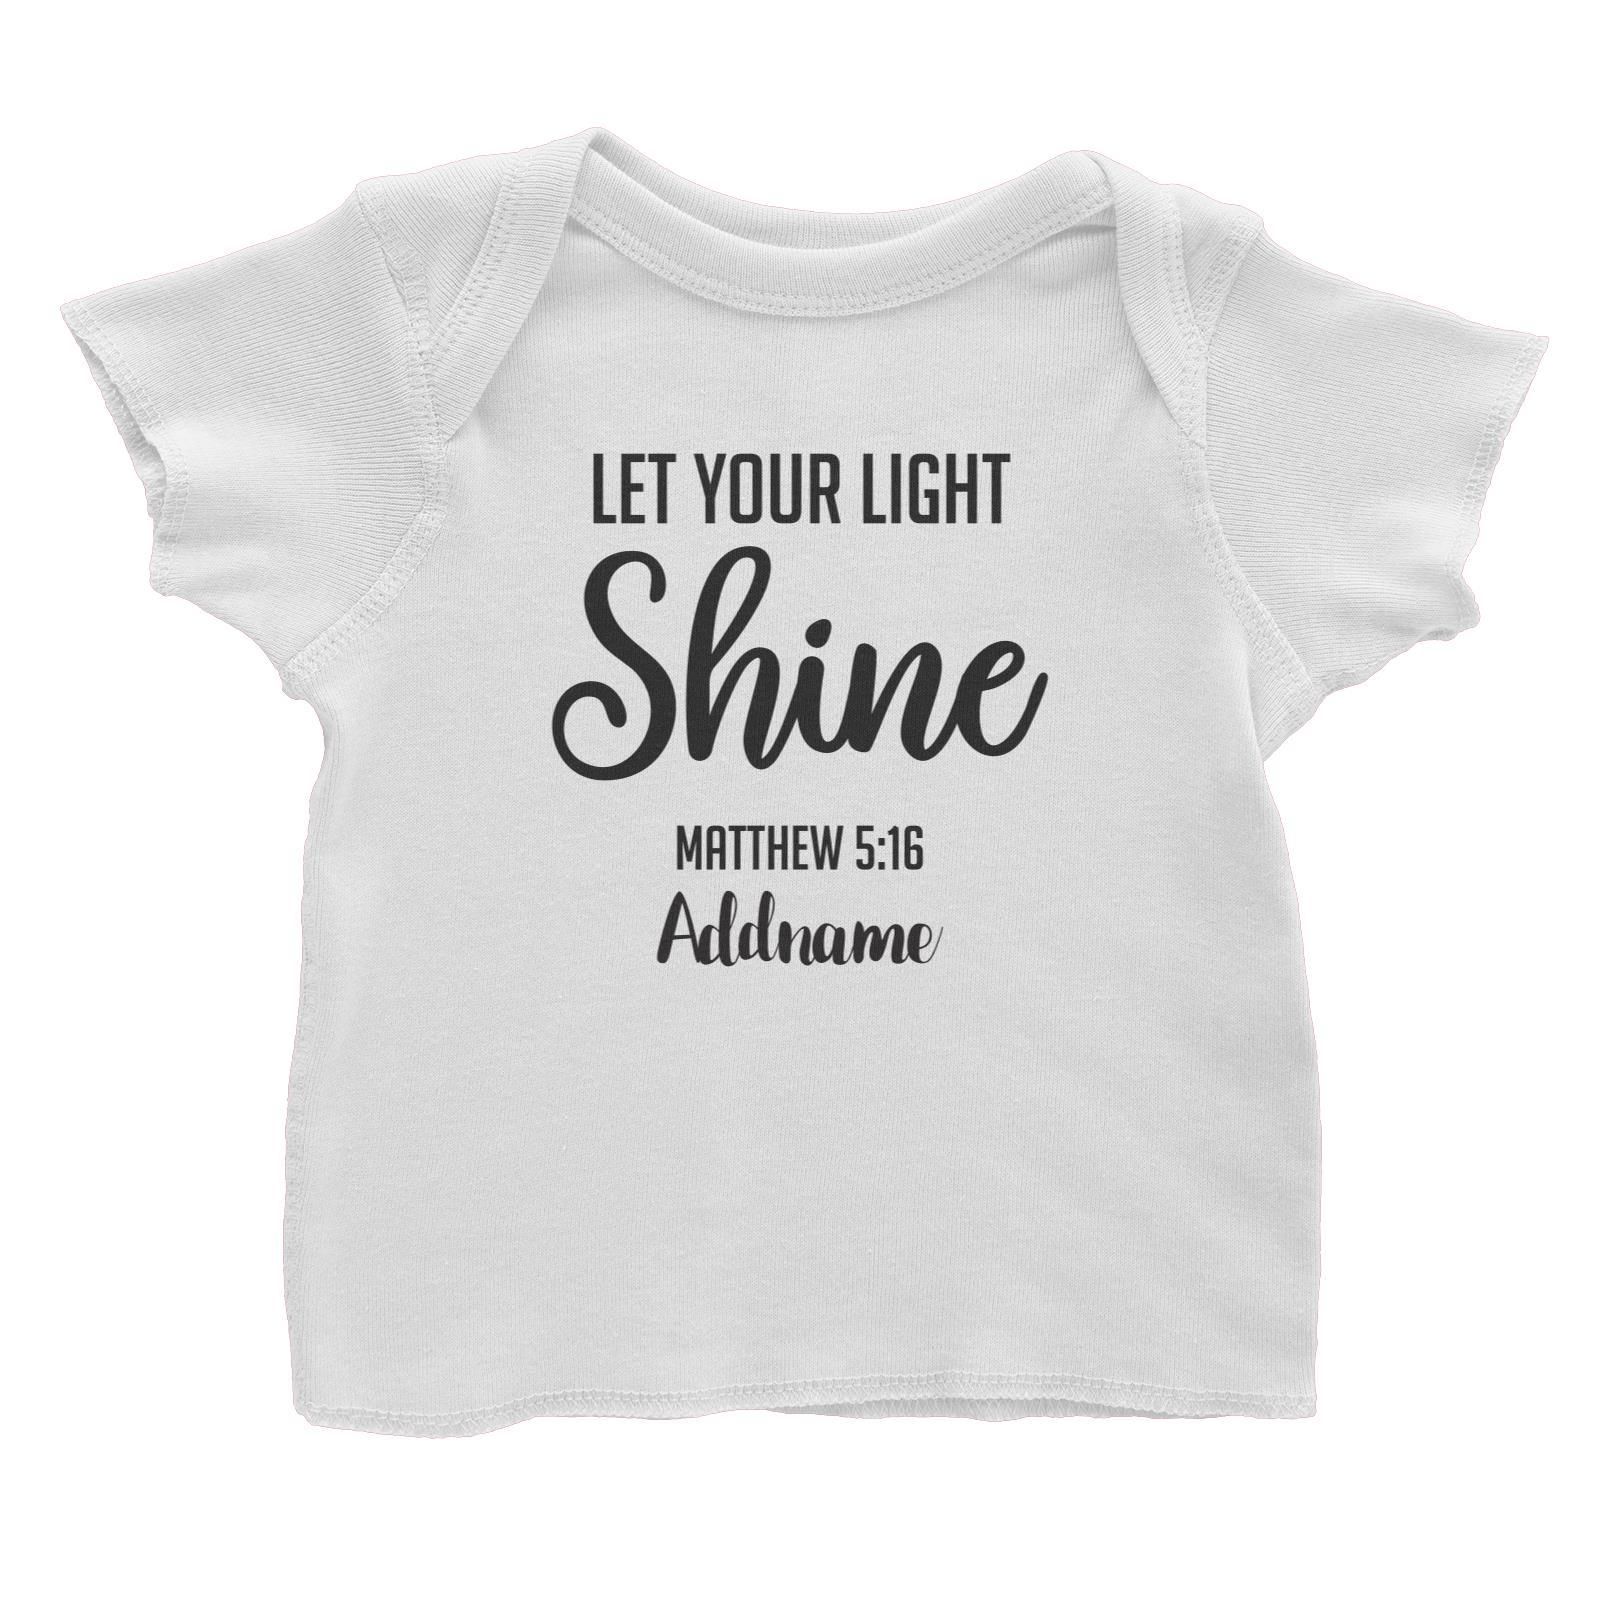 Christian Series Let Your Light Shine Matthew 5.16 Addname Baby T-Shirt